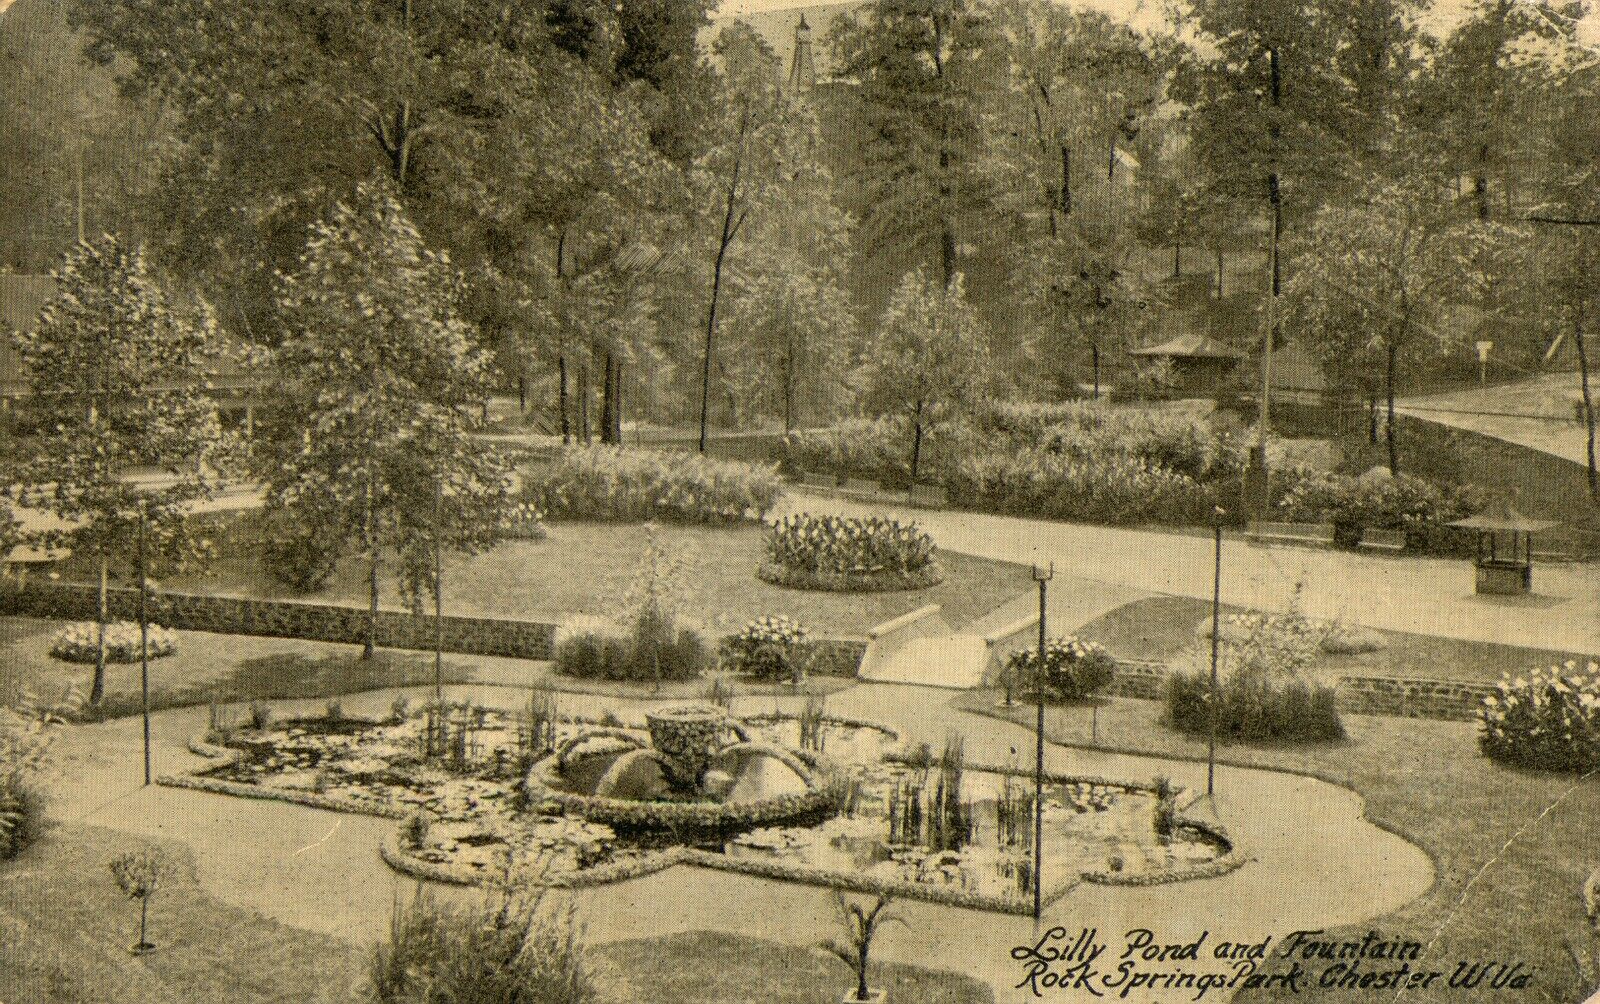 Chester, West Virginia, Lilly Pond & Fountain, Rock Springs Park, 1912 Postcard